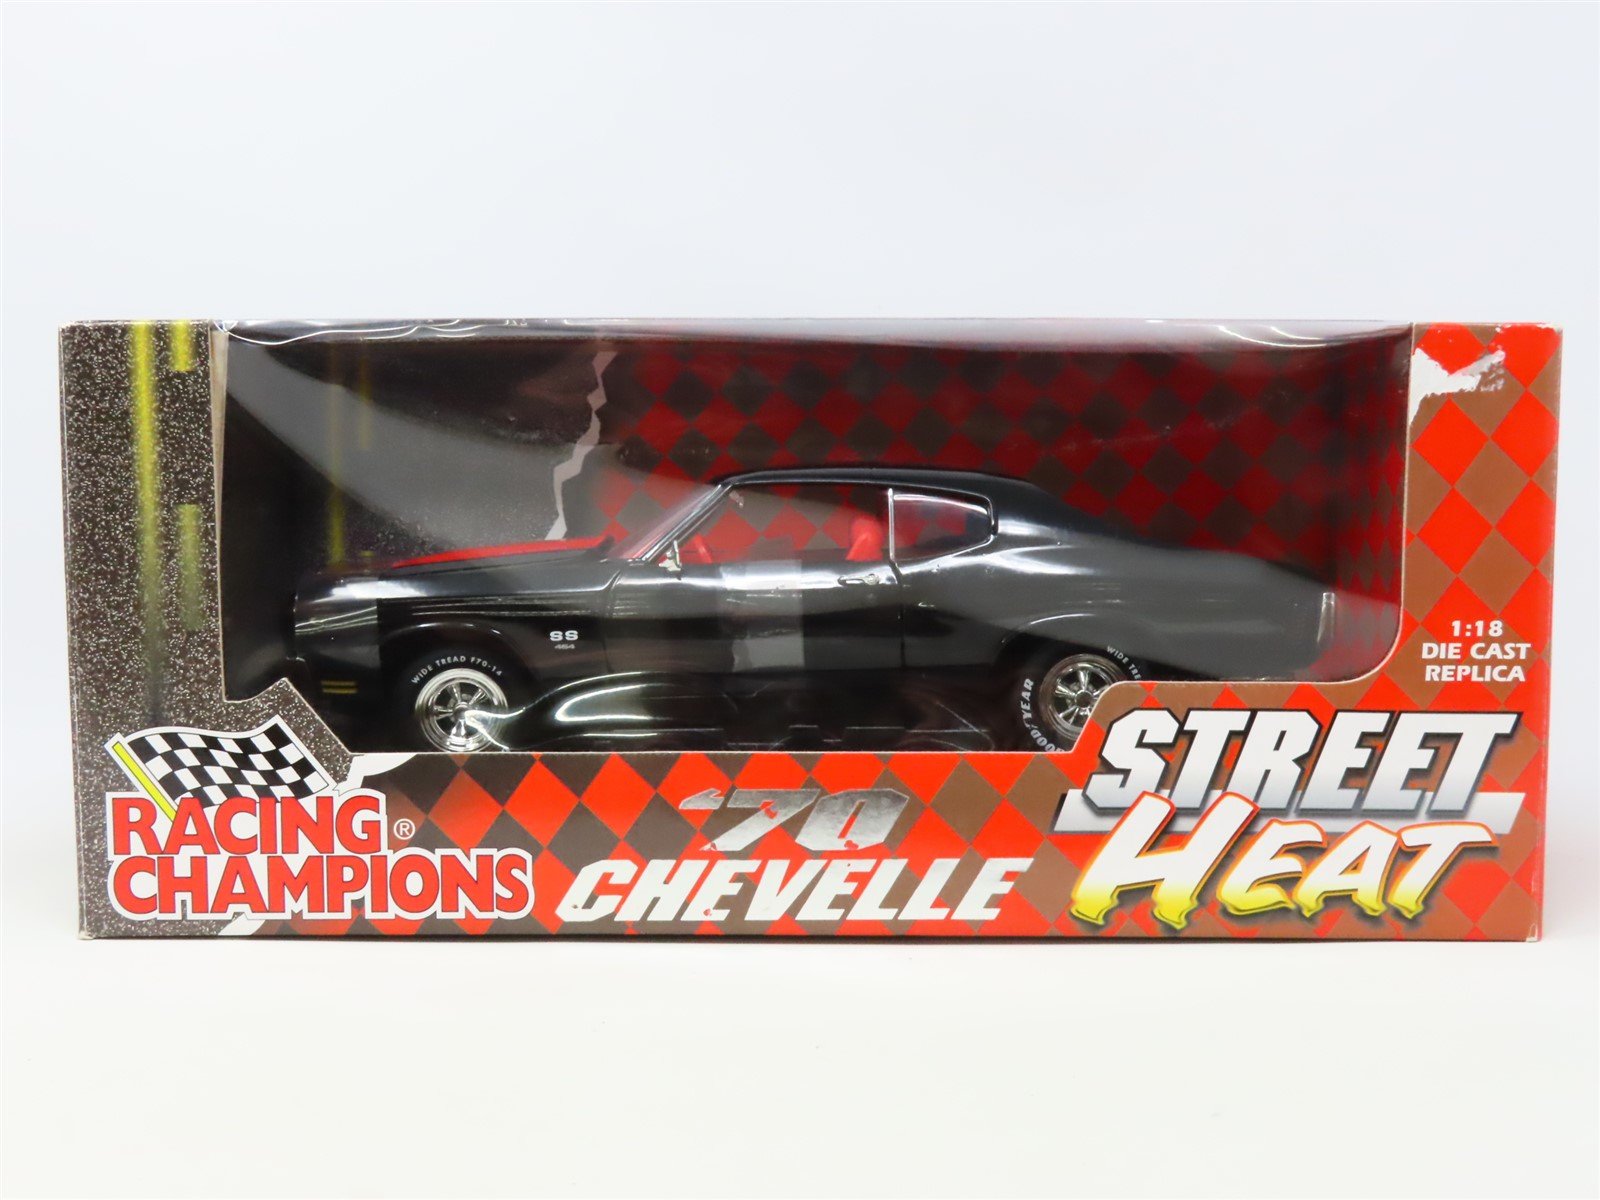 1:18 Scale Racing Champions Street Heat #76070 Die-Cast '70 Chevelle - Black/Red